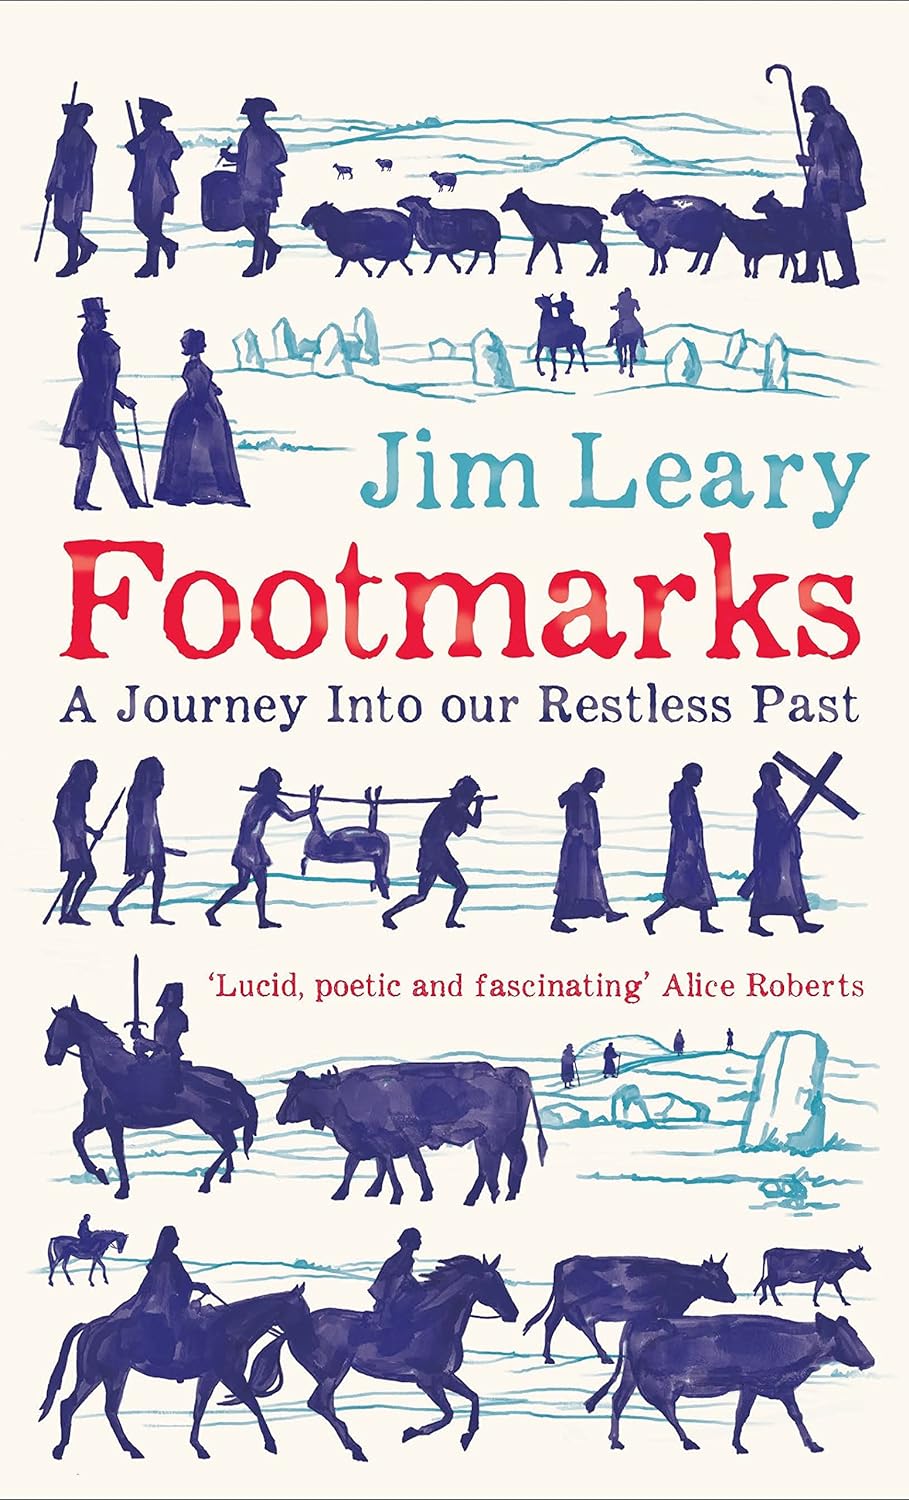 Footmarks: A Journey Into our Restless Past